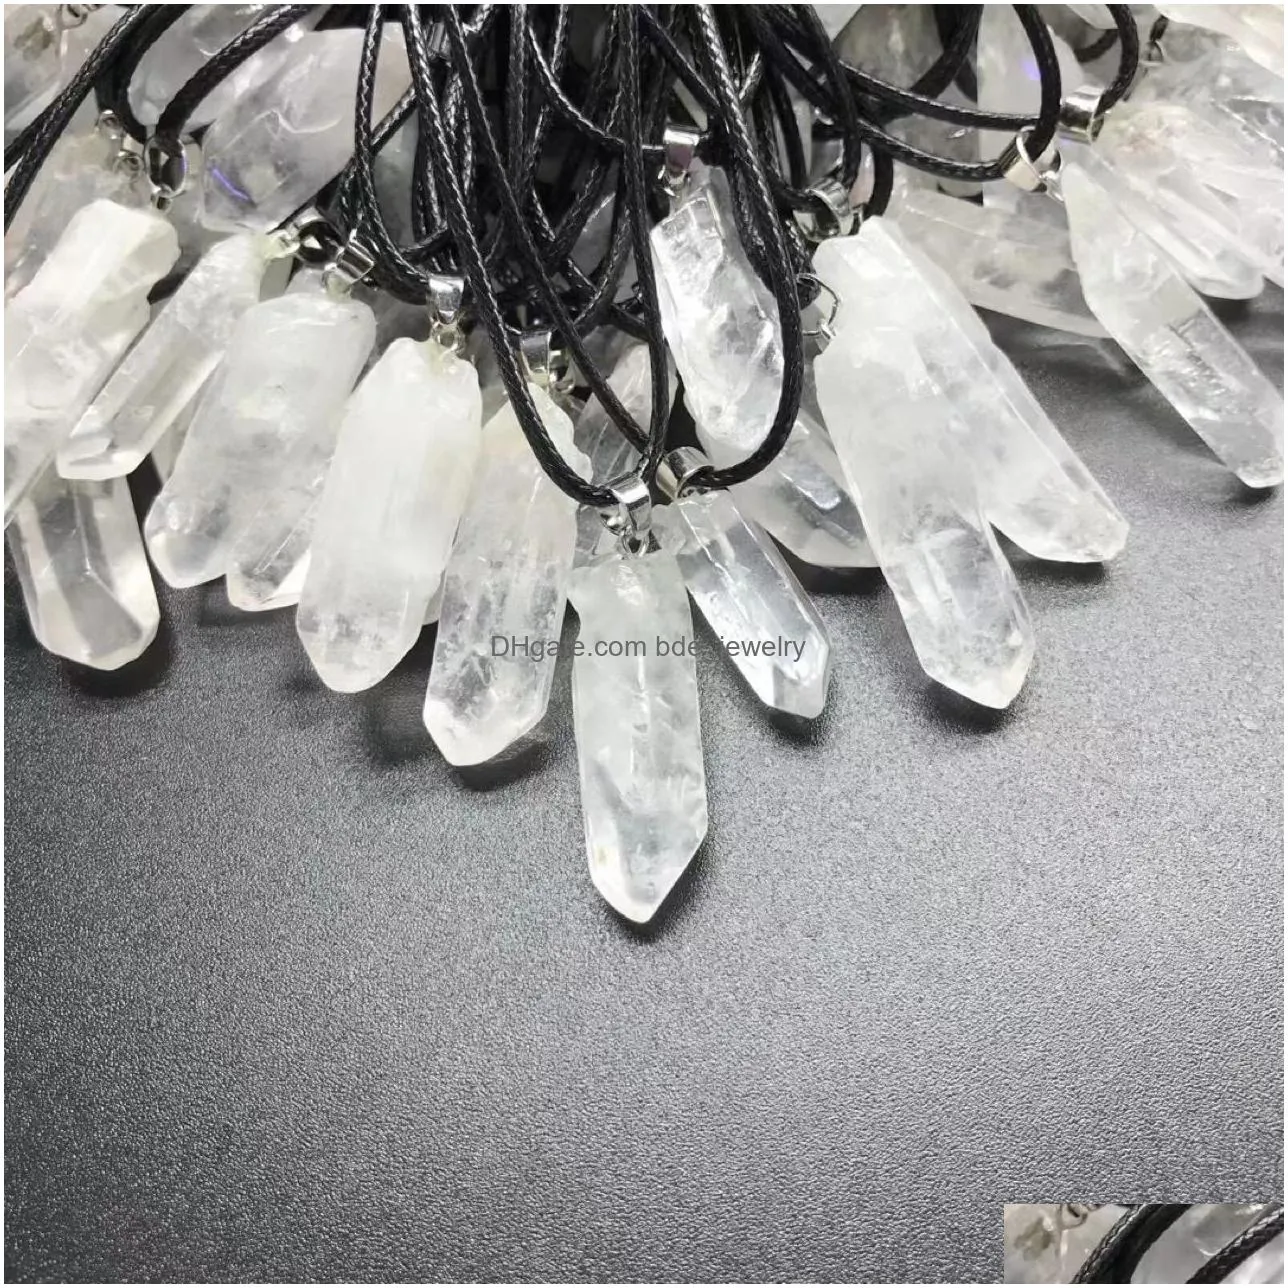 bulk natural yellow white crystal stone fluorite charms amethyst irregular shape pendants for necklace earrings jewelry making